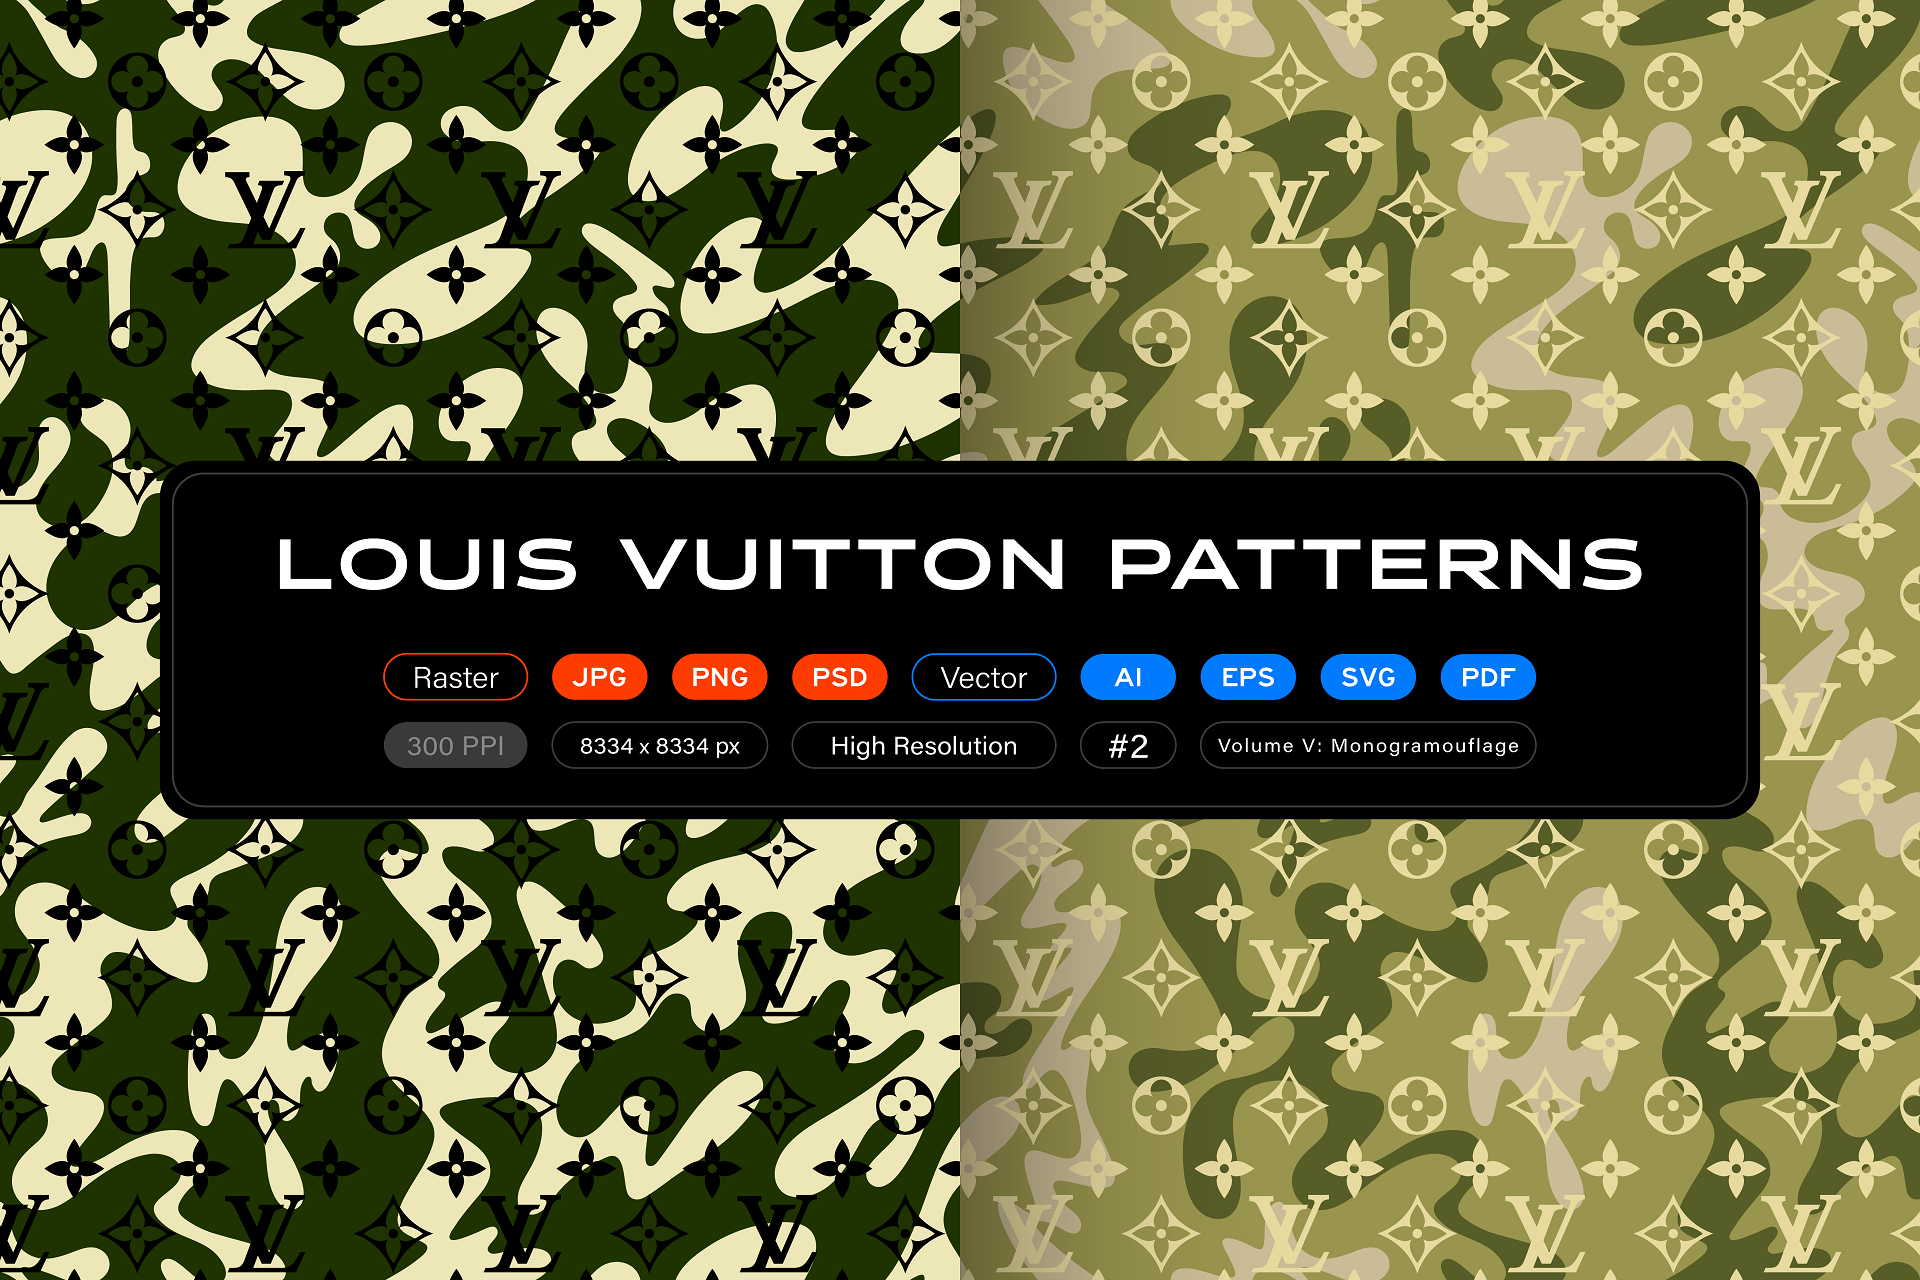 Lv With Supreme Seamless Pattern SVG